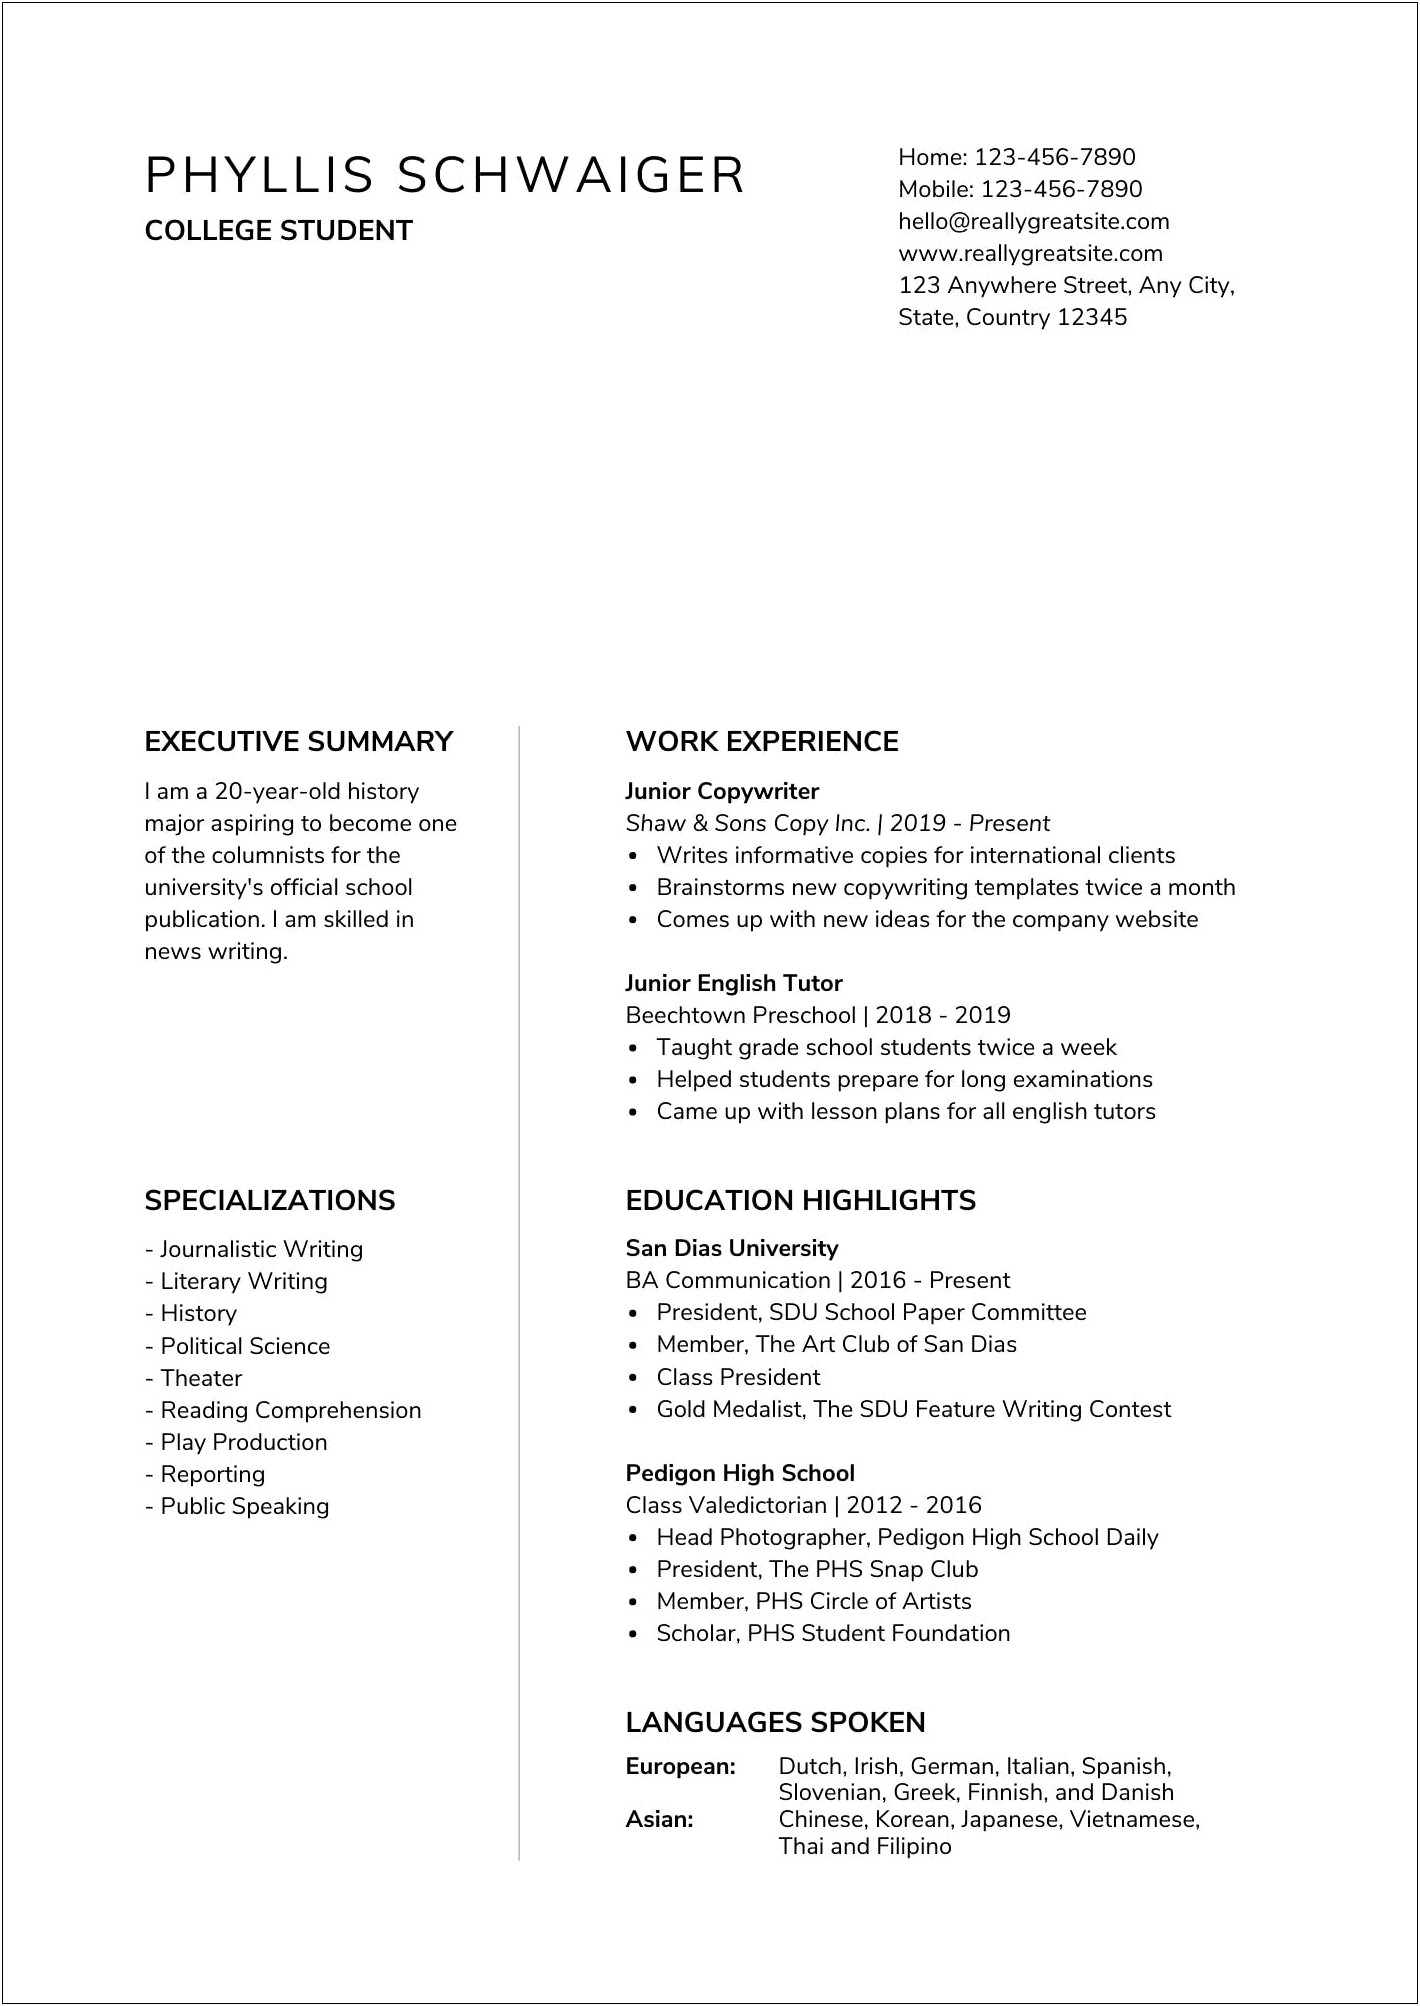 Education Or Work Experience First Resume